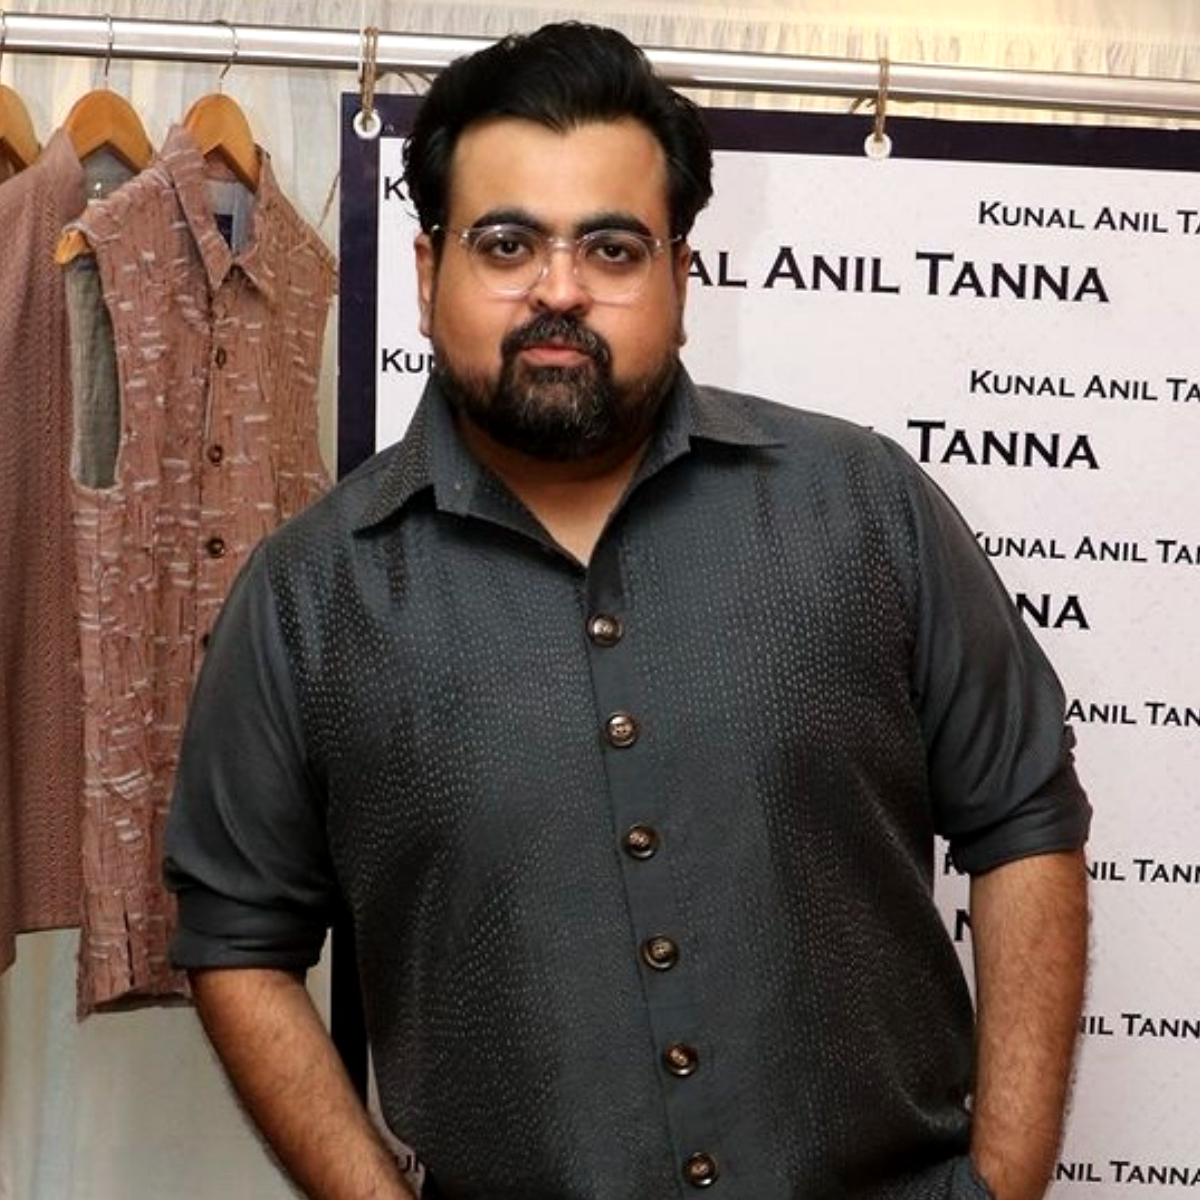 EXCLUSIVE: Kunal Anil Tanna on his signature designs, shacket trend, desi style tips, pastel love & more